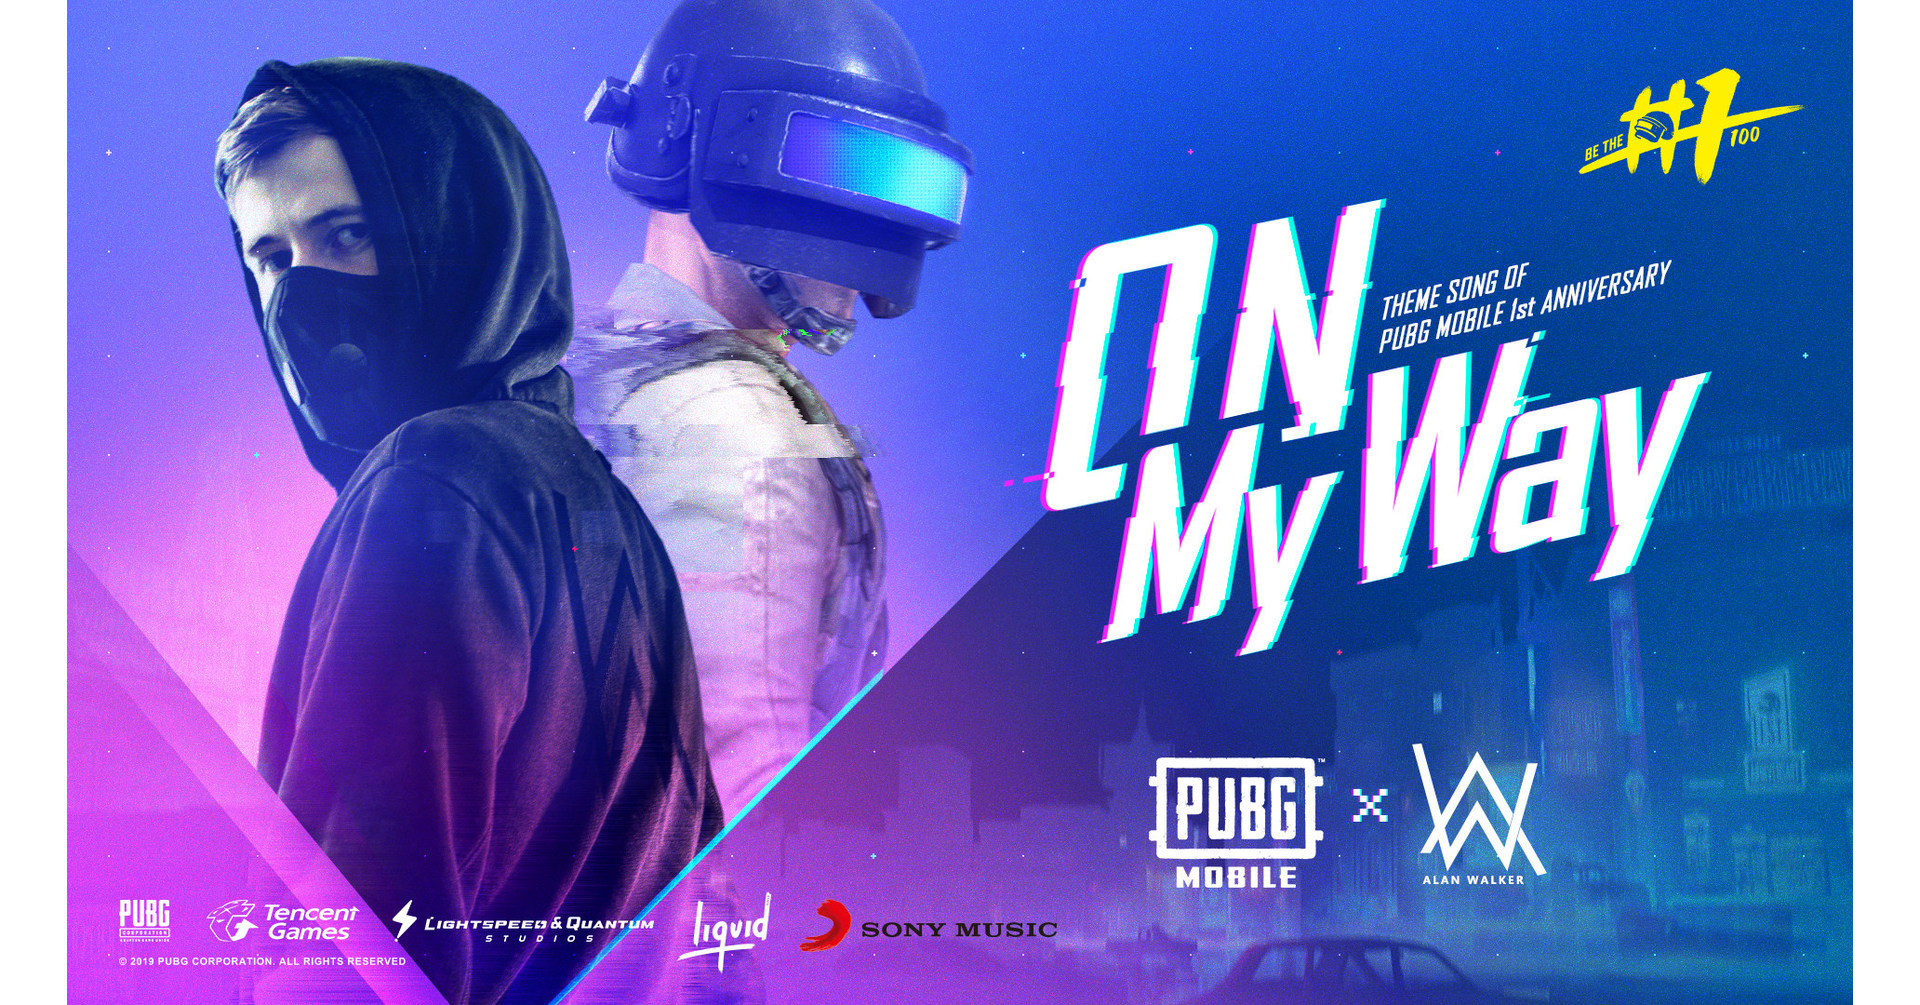 PUBG MOBILE 1st Anniversary Event Featured Live Performance of New Song By  Alan Walker, Gameplay With Influencers, Announcement of $ Million Prize  Pool and Plans for PUBG MOBILE CLUB OPEN 2019